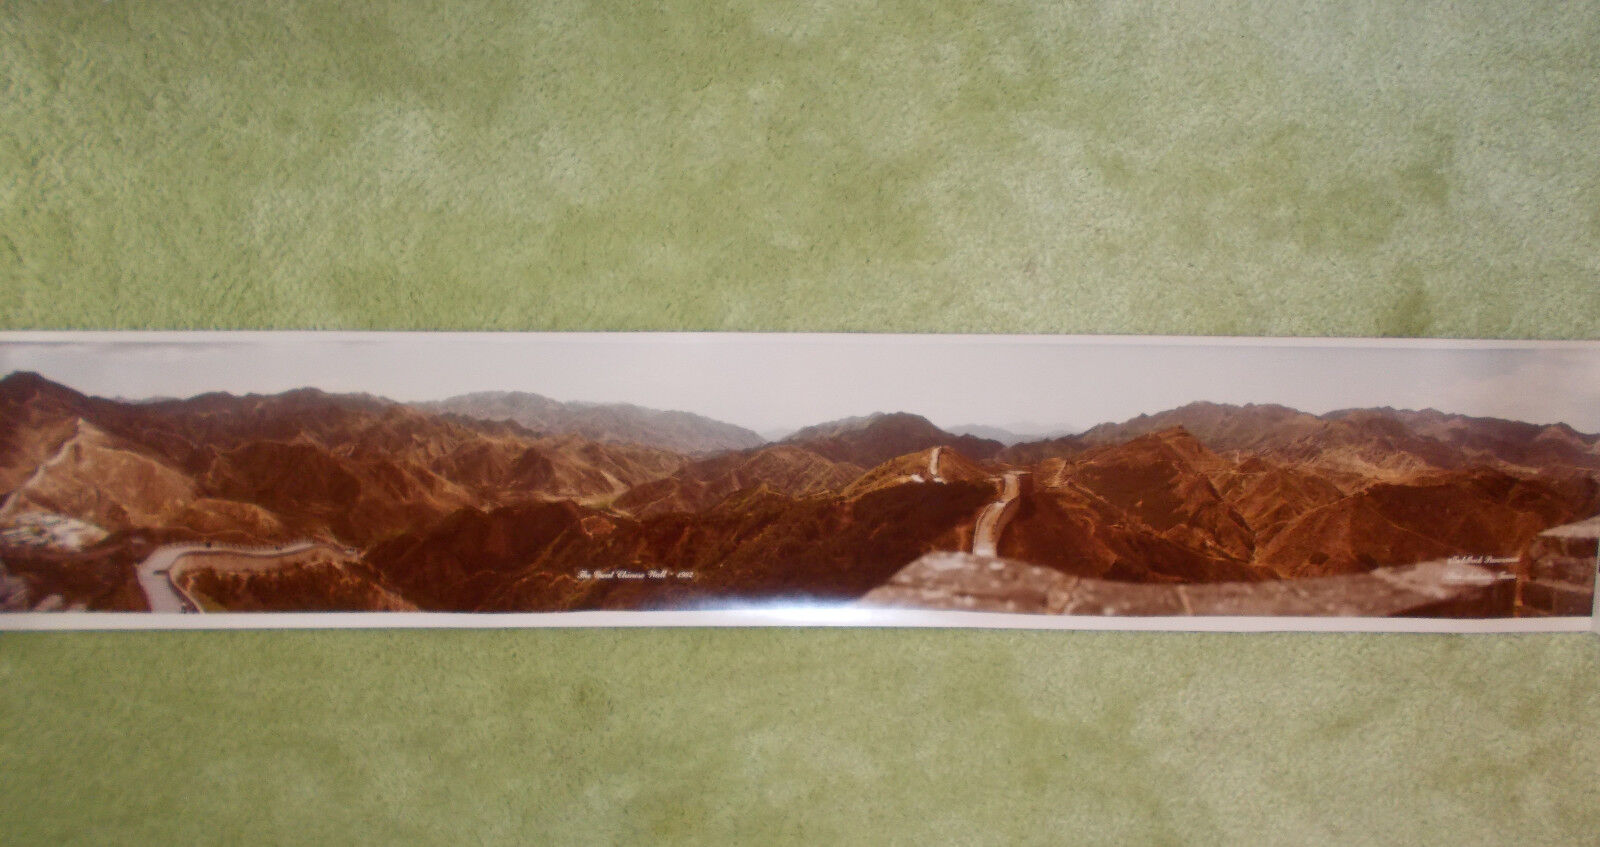 E.O. GOLDBECK PHOTO. THE GREAT CHINA WALL -  PANORAMIC PICTURE 1982